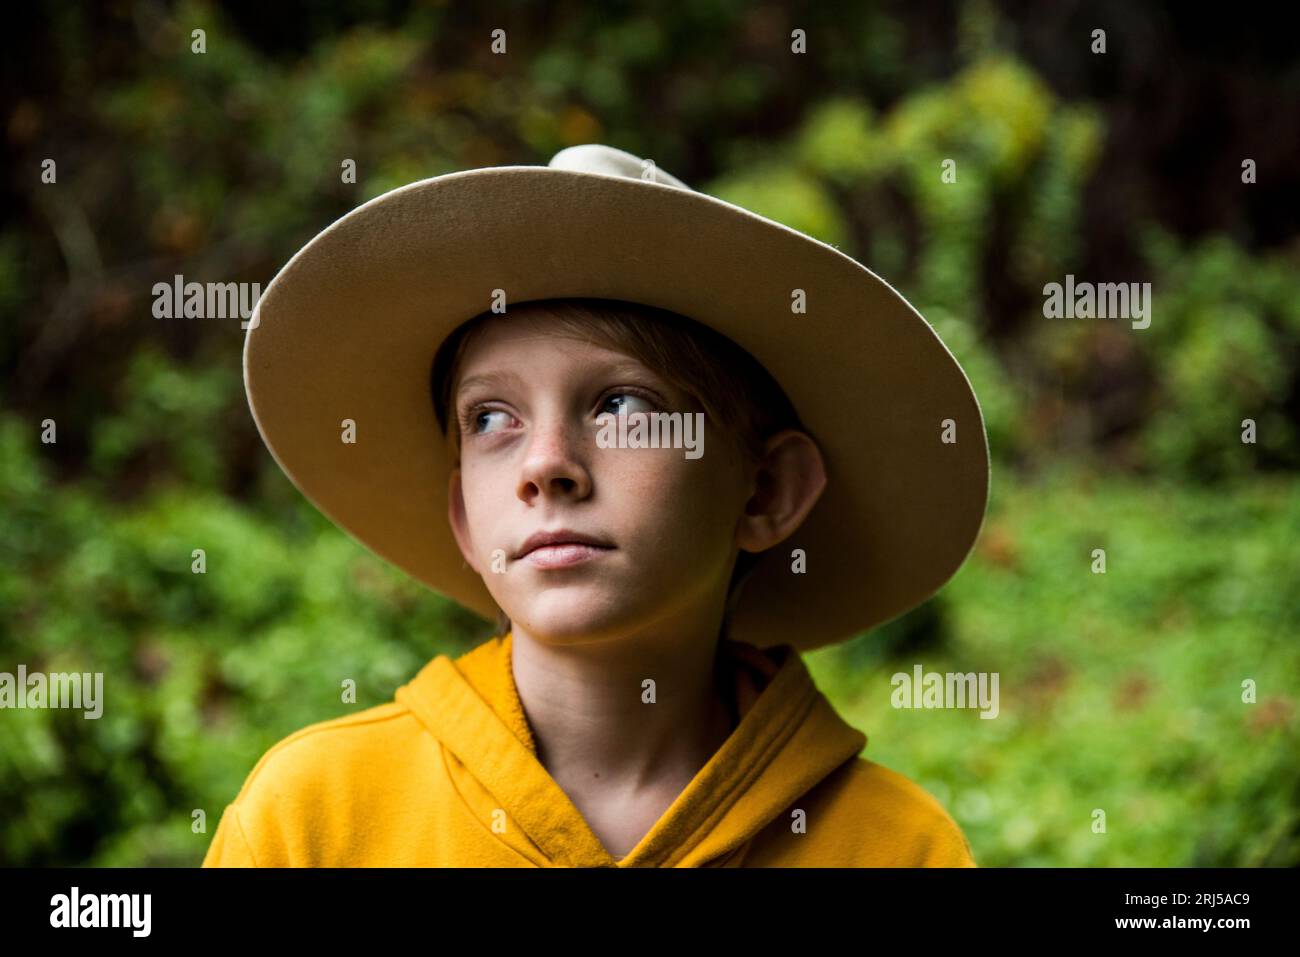 Young boy wearing big hat looking up and away Stock Photo